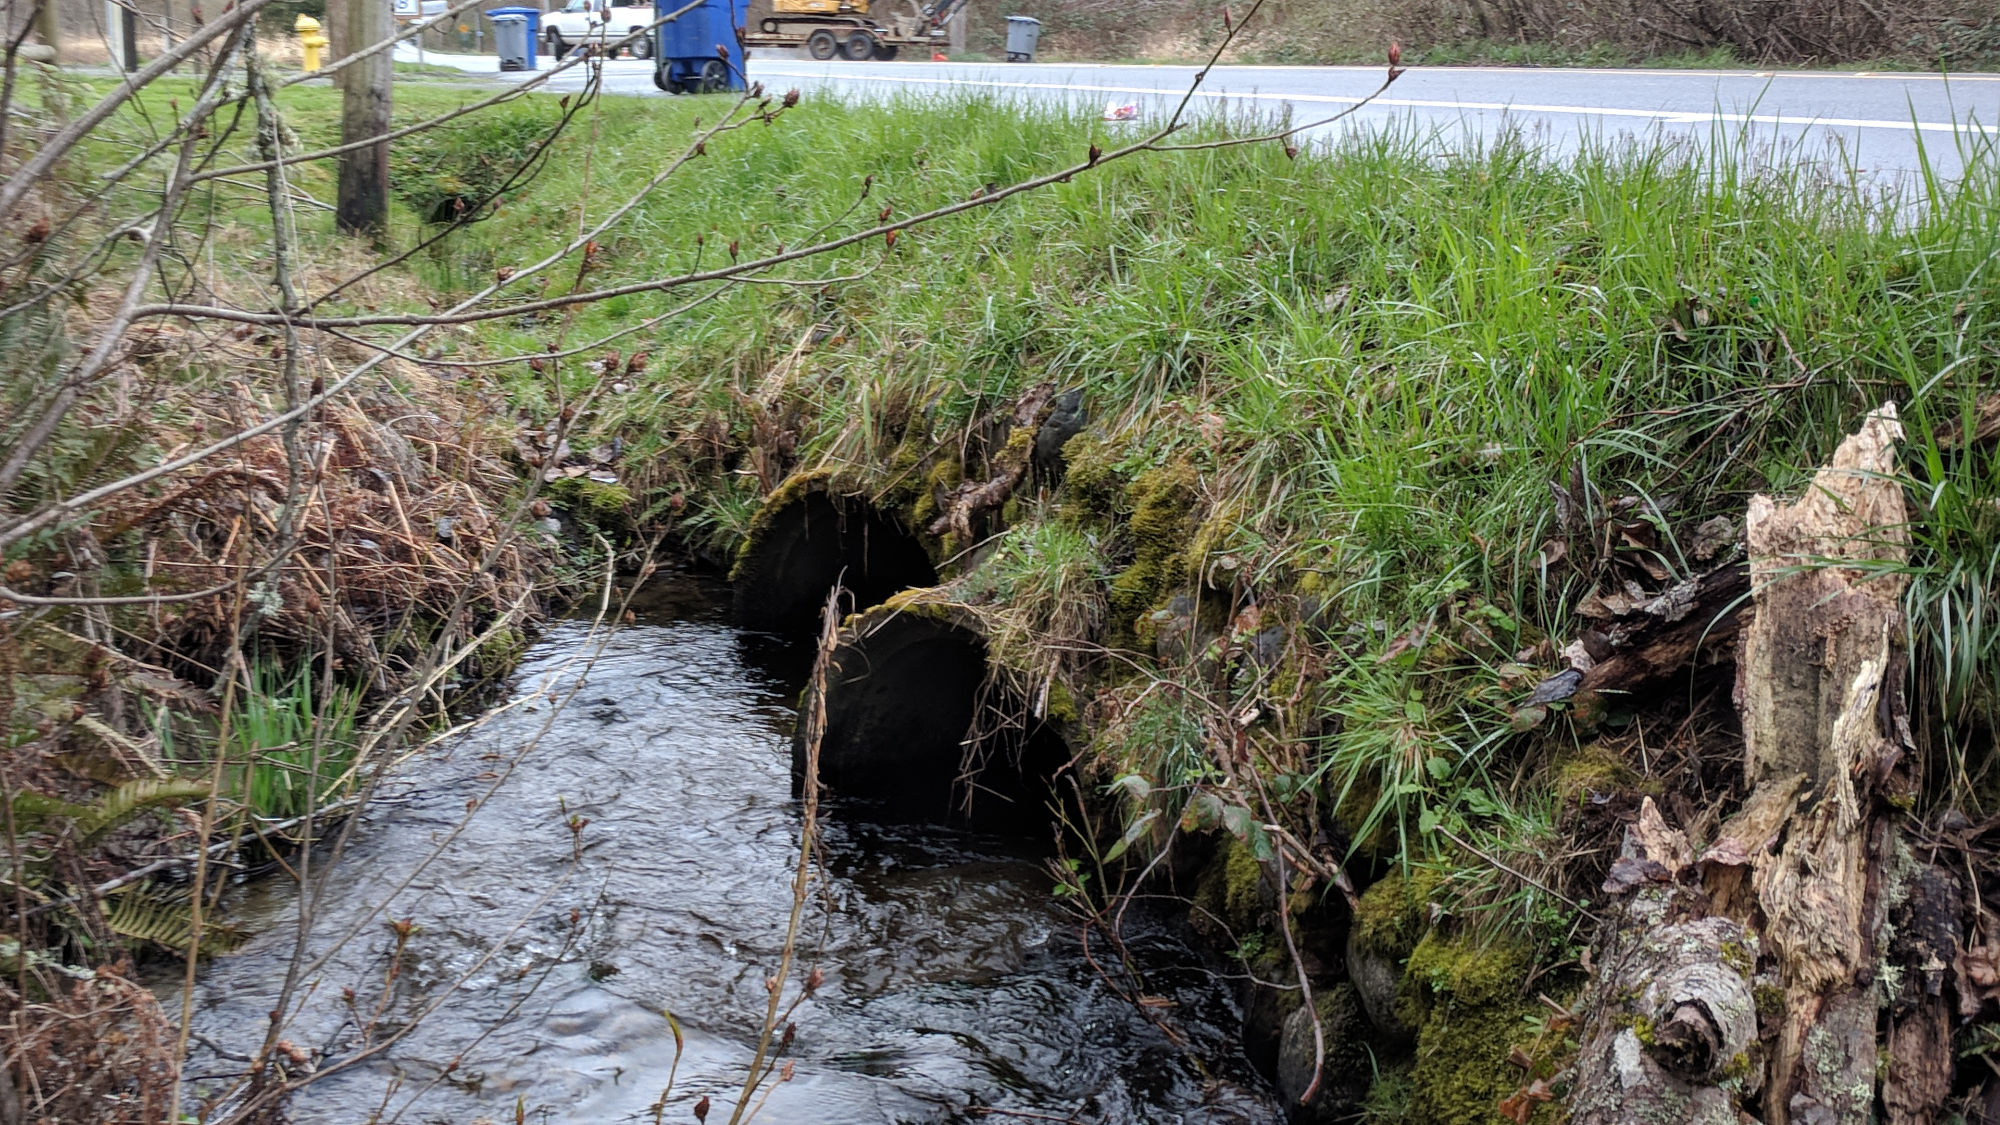 two mossy pipes convey water beneath a road, water nearly halfway up the large pipes